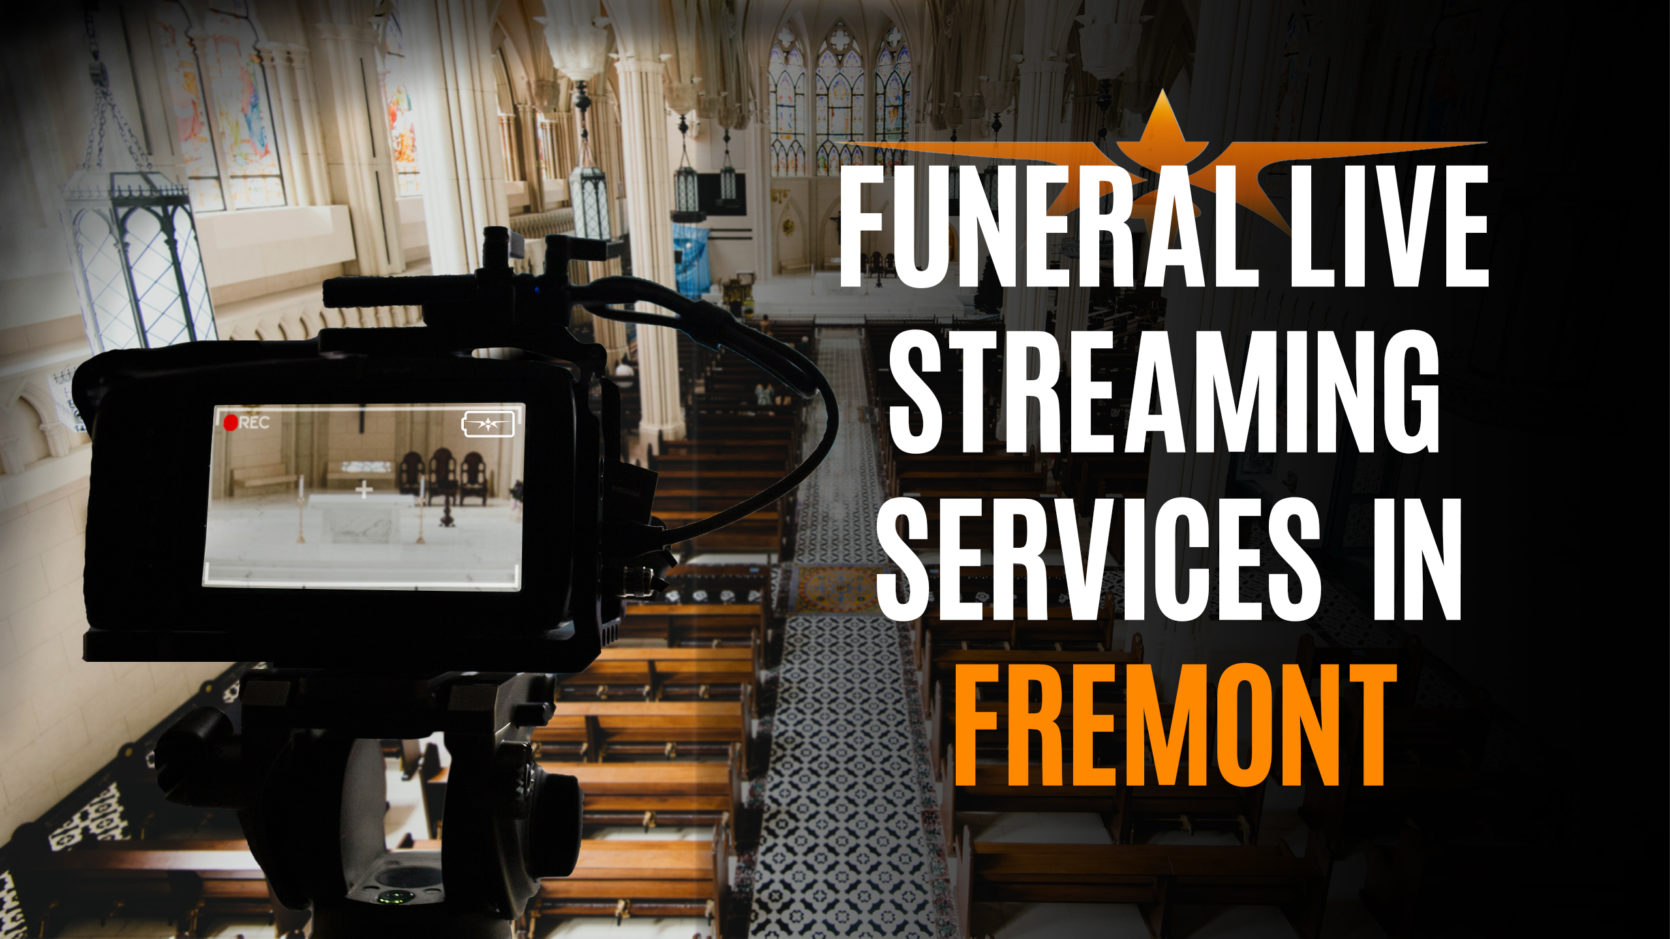 Funeral Live Streaming Services in Fremont